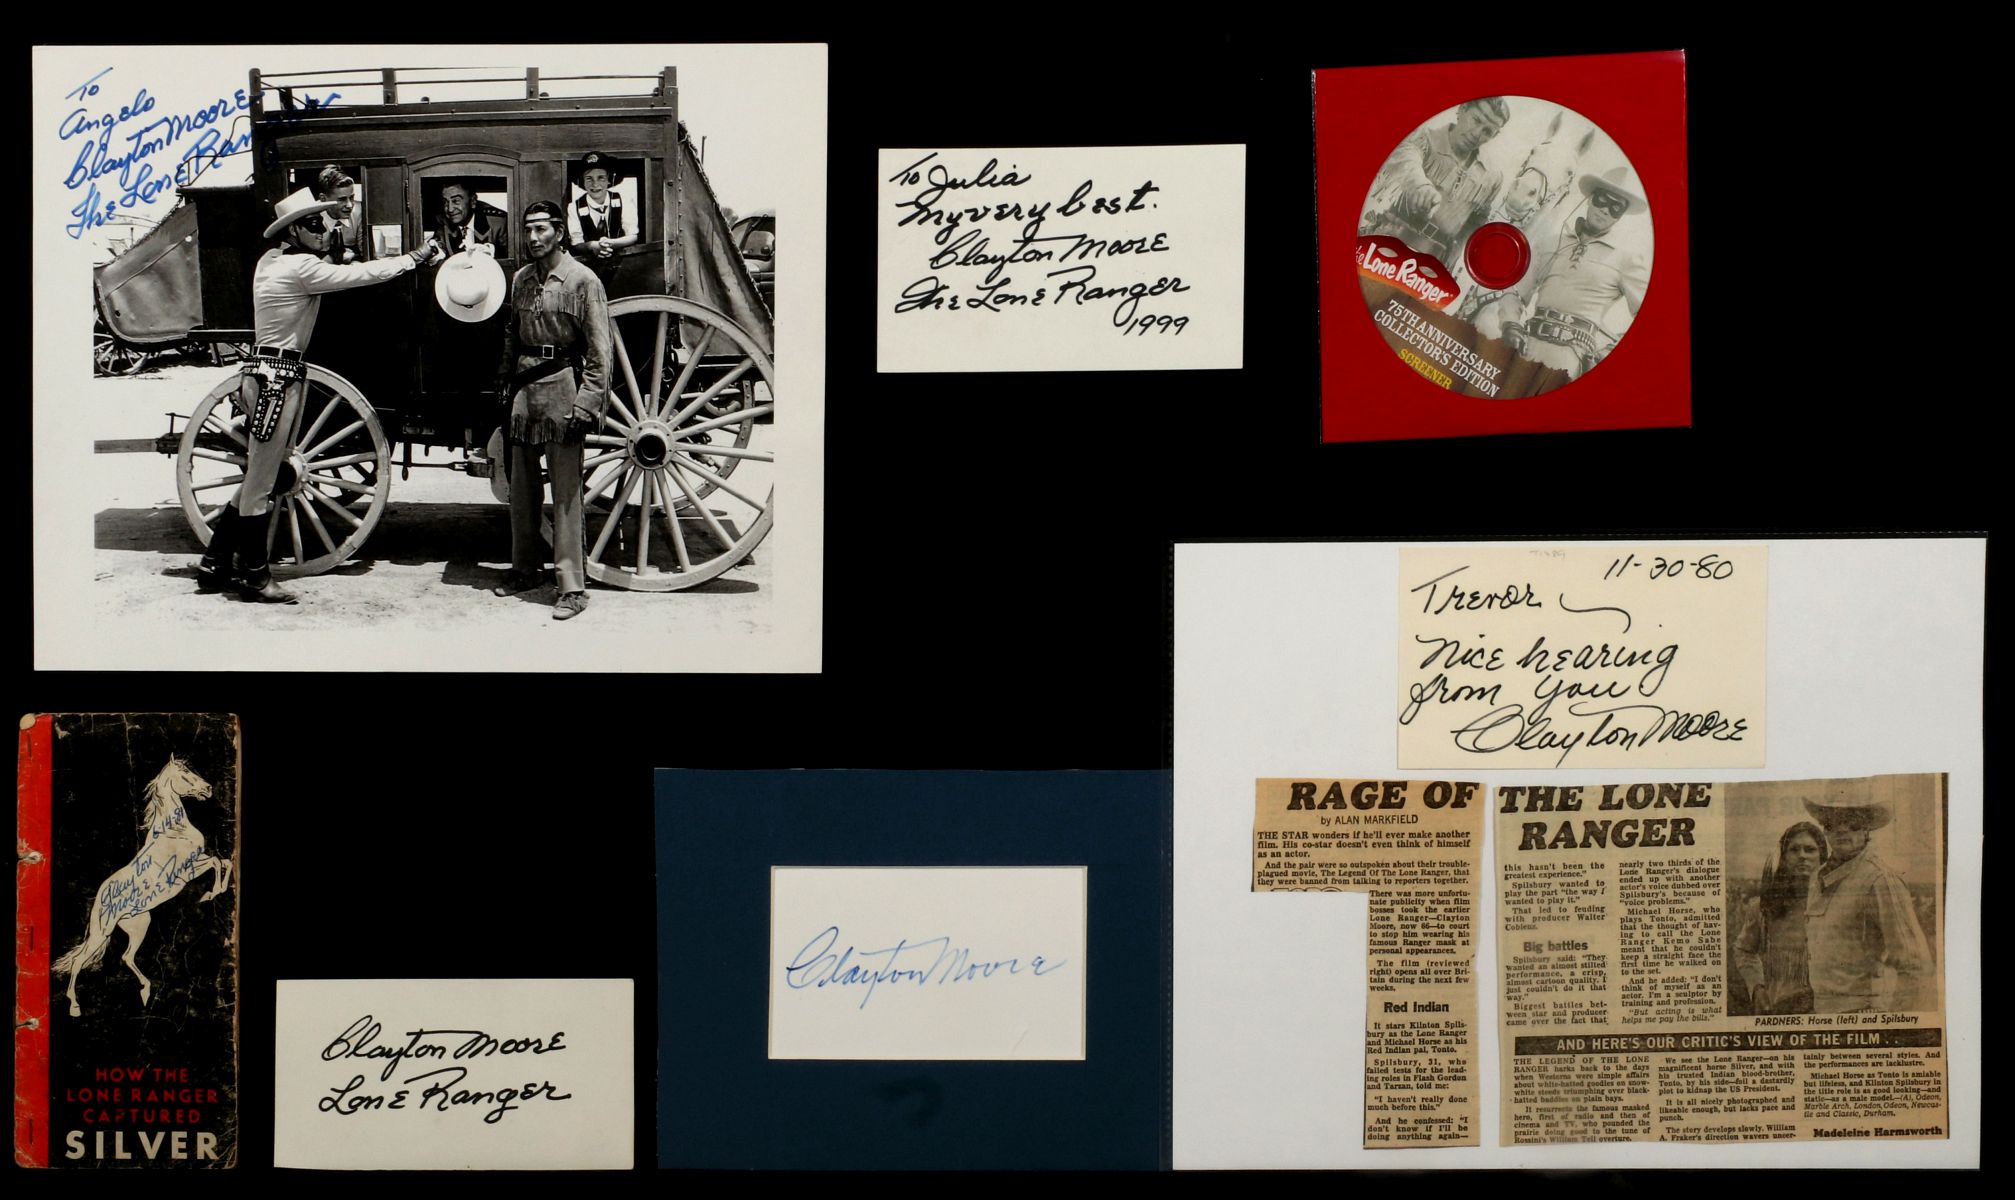 SIX CLAYTON MOORE SIGNED LONE RANGER ITEMS